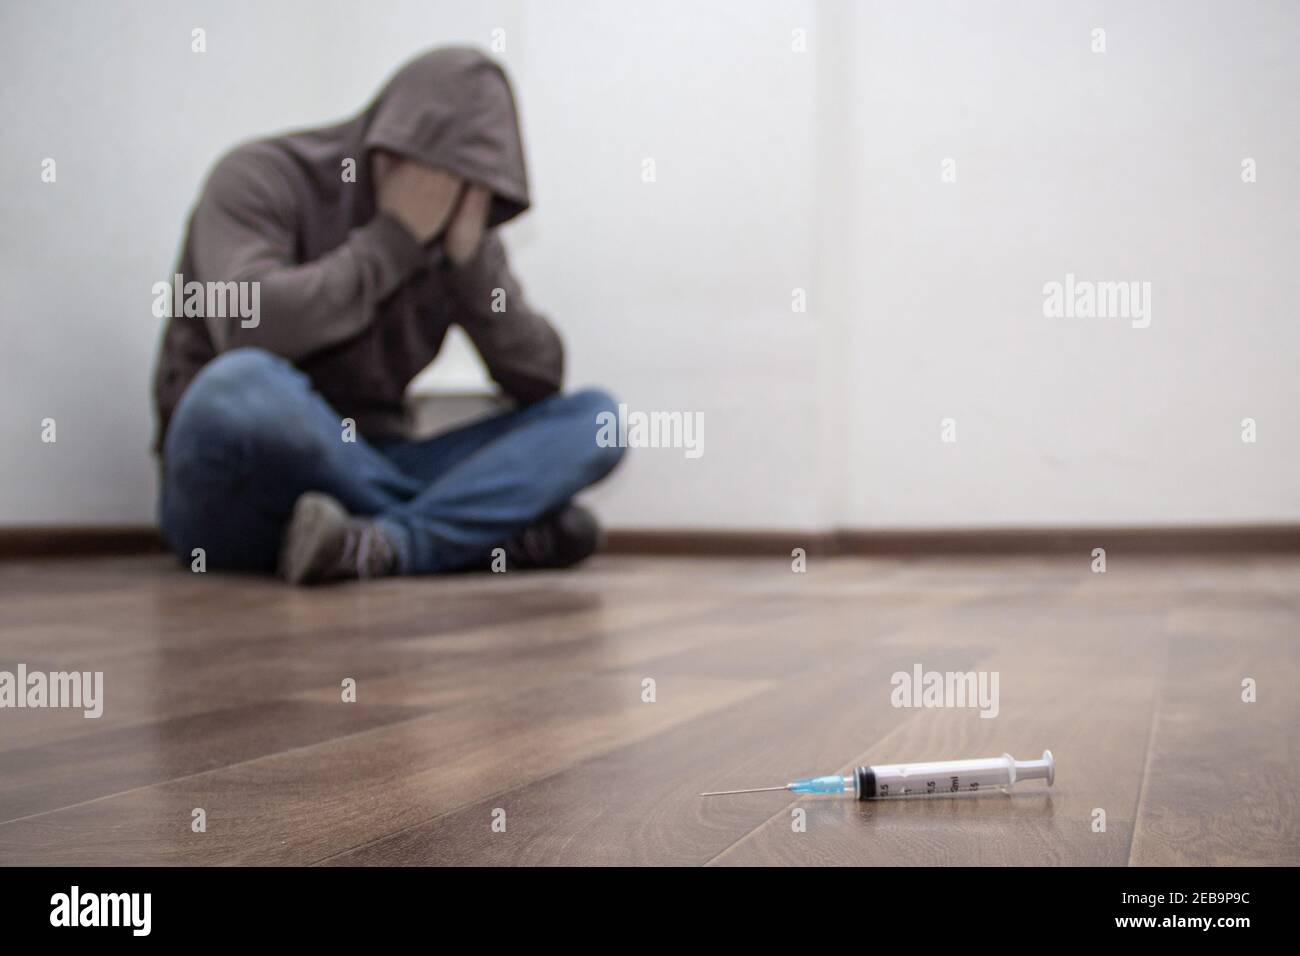 Syringe and man drug addict without of focus sitting in corner in the background. With copy space Stock Photo